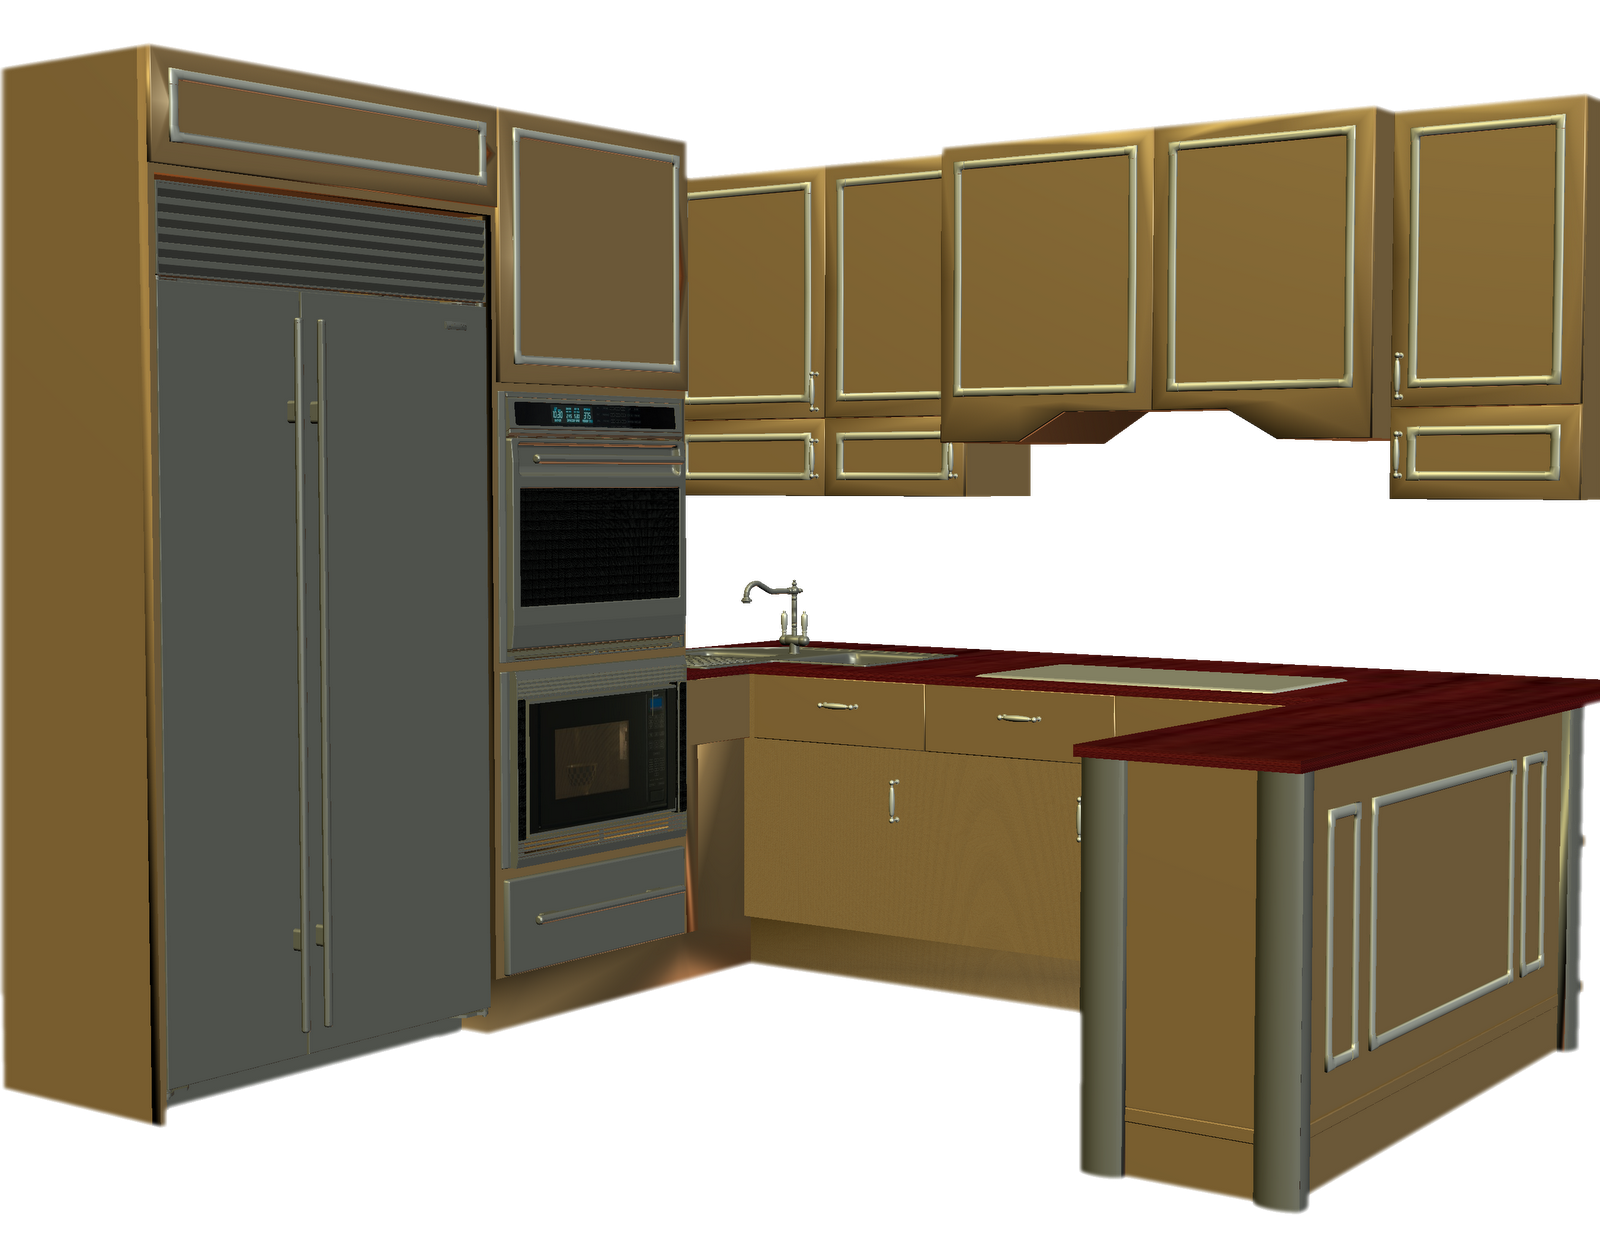 Kitchen clipart free download clip art on 5